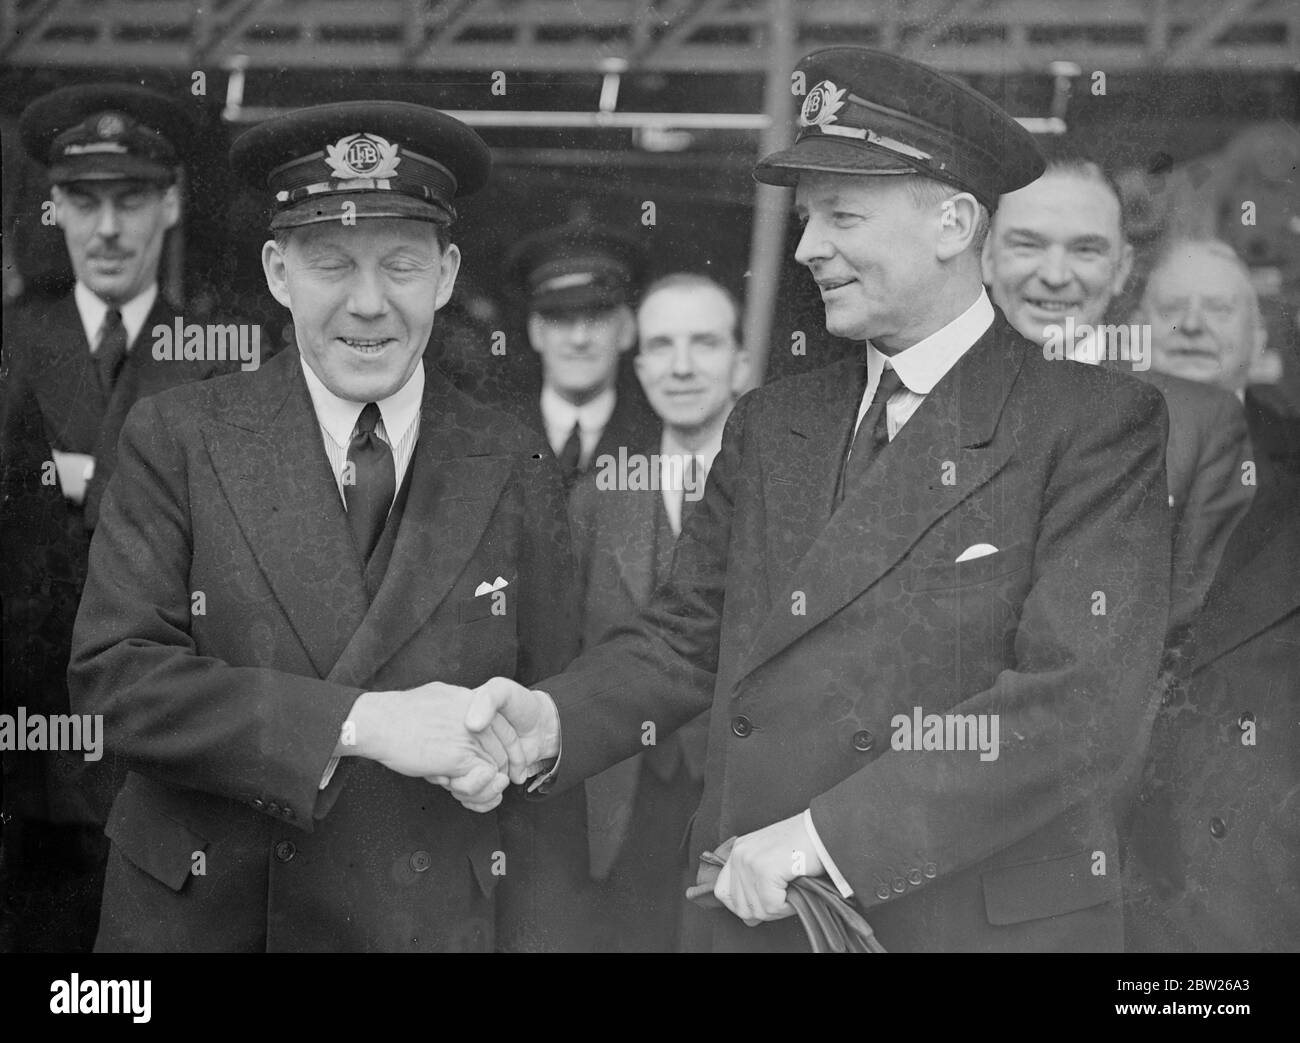 New London Fire Brigade chief taken over. Commander A N G Firebrace, the new Chief of the London Fire Brigade, Major C C B Morris, at the Fire Brigade headquarters on the Albert embankment. Photo shows, the new chief, Commander A N G Firebrace (right) being greeted by Major C C B Morris, the retiring chief. 3 May 1938 Stock Photo